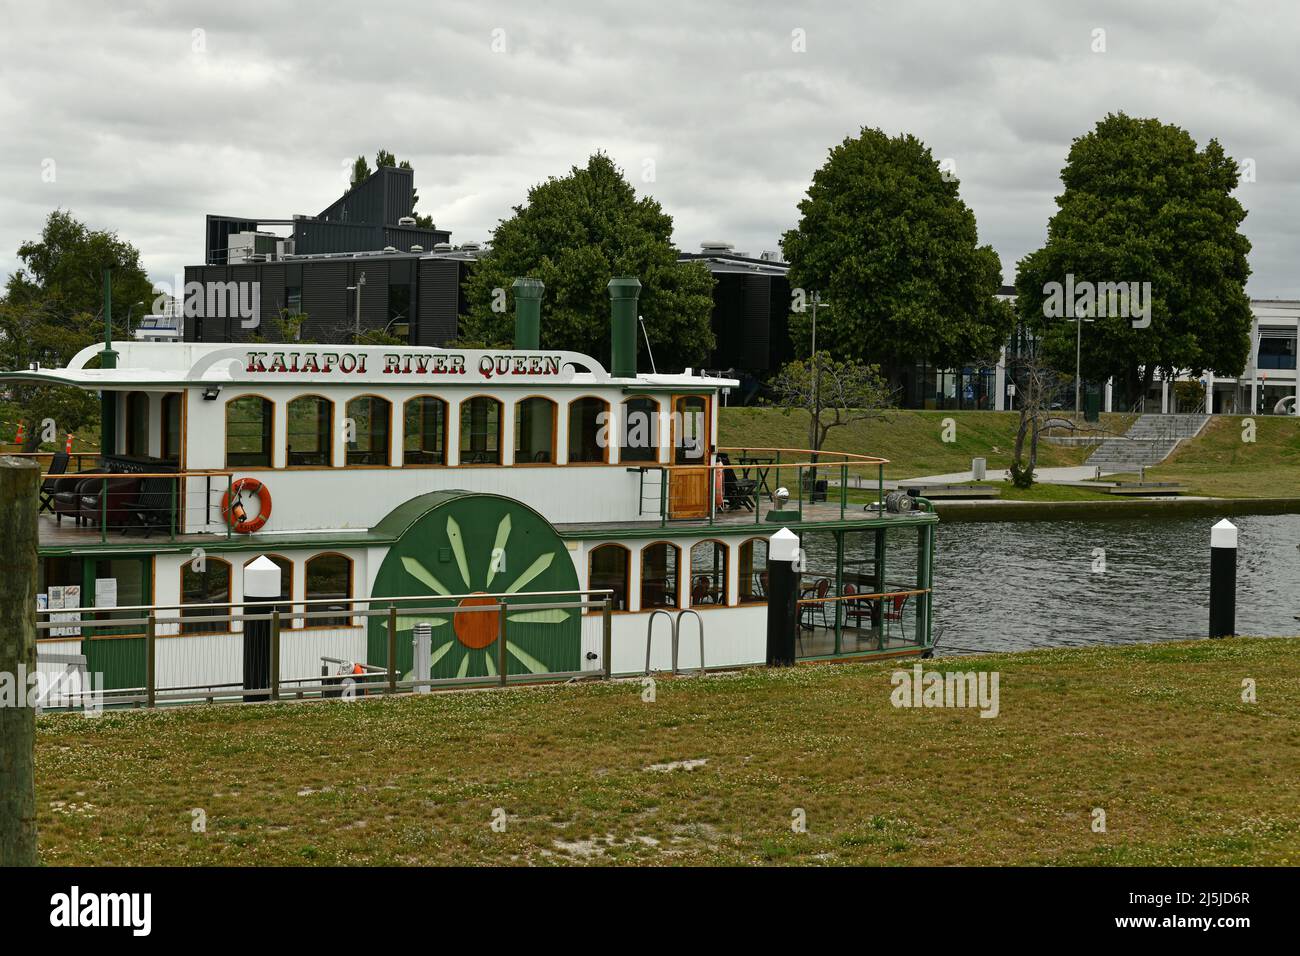 KAIAPOI, NEW ZEALAND, JANUARY 12, 2022: The Kaiapoi River Queen, a tourist attraction and floating restaurant, in the Kaiapoi River Stock Photo